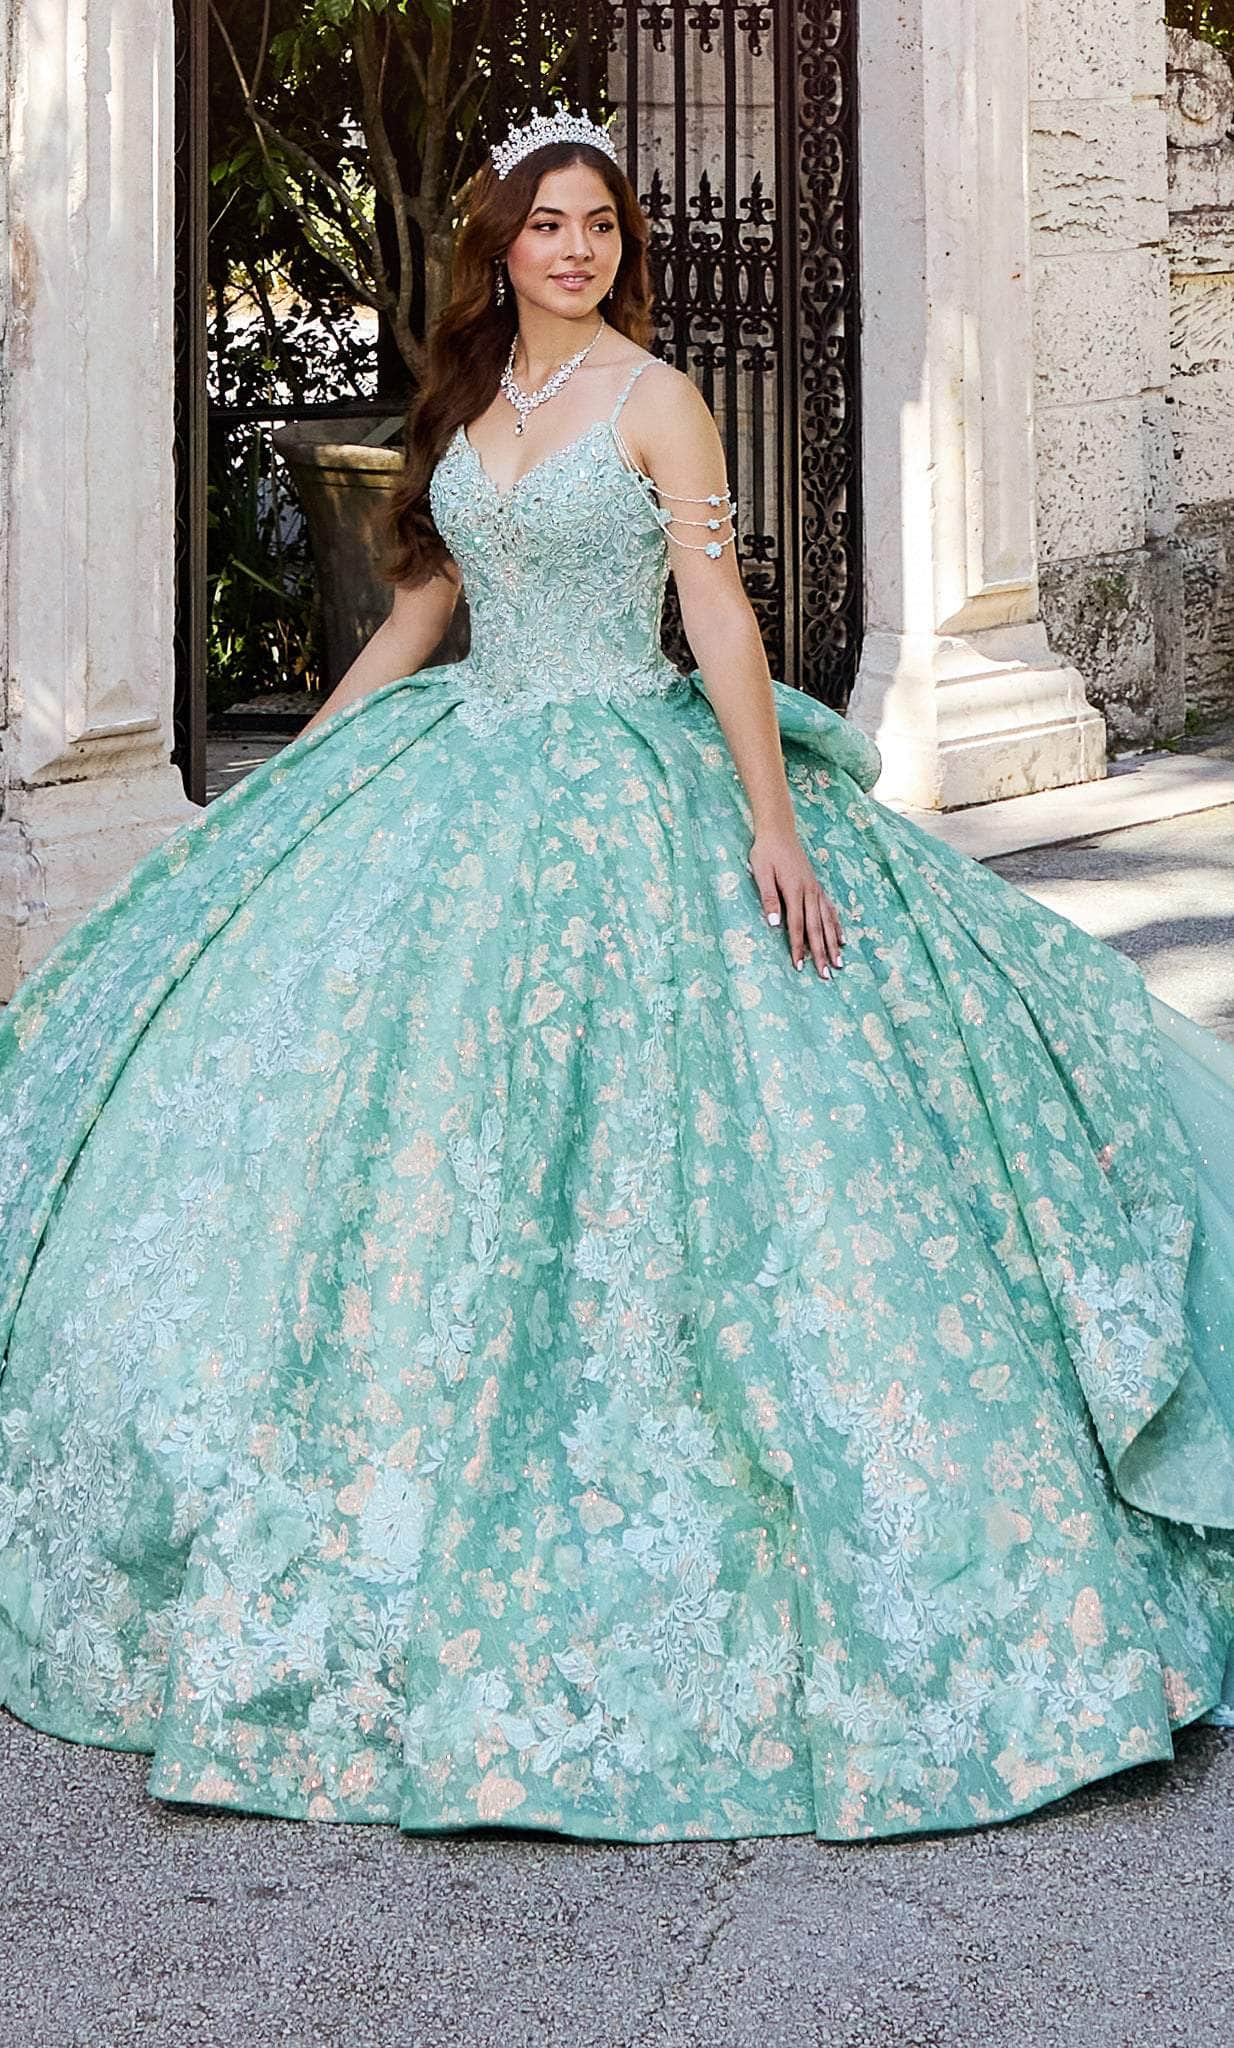 Princesa by Ariana Vara PR30139 - Bolero-Attached Floral Ball Gown Special Occasion Dress 00 / Wintermint